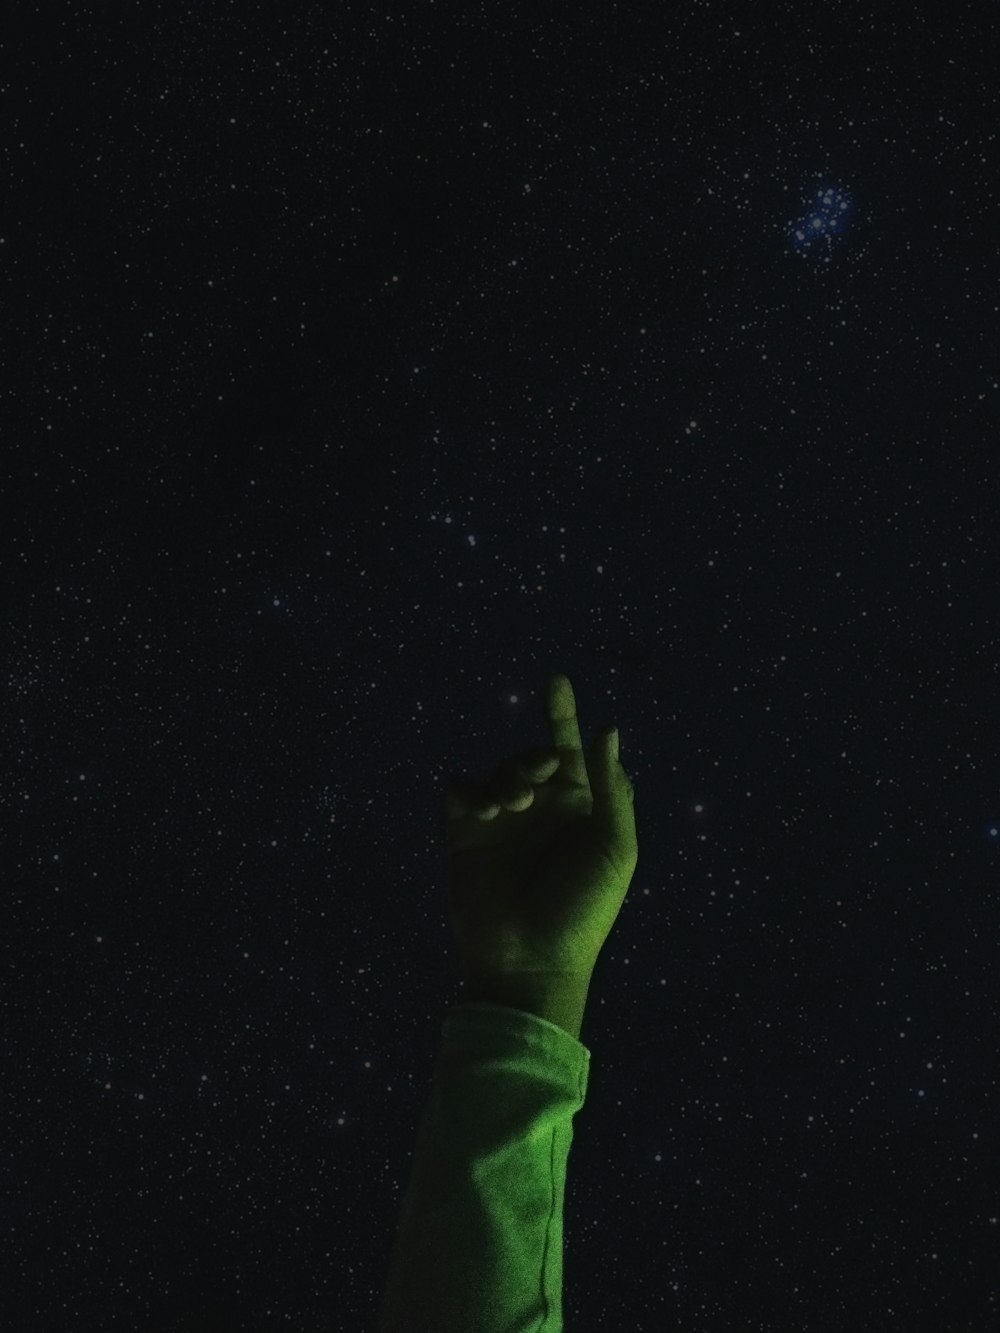 a hand reaching up into the sky at night